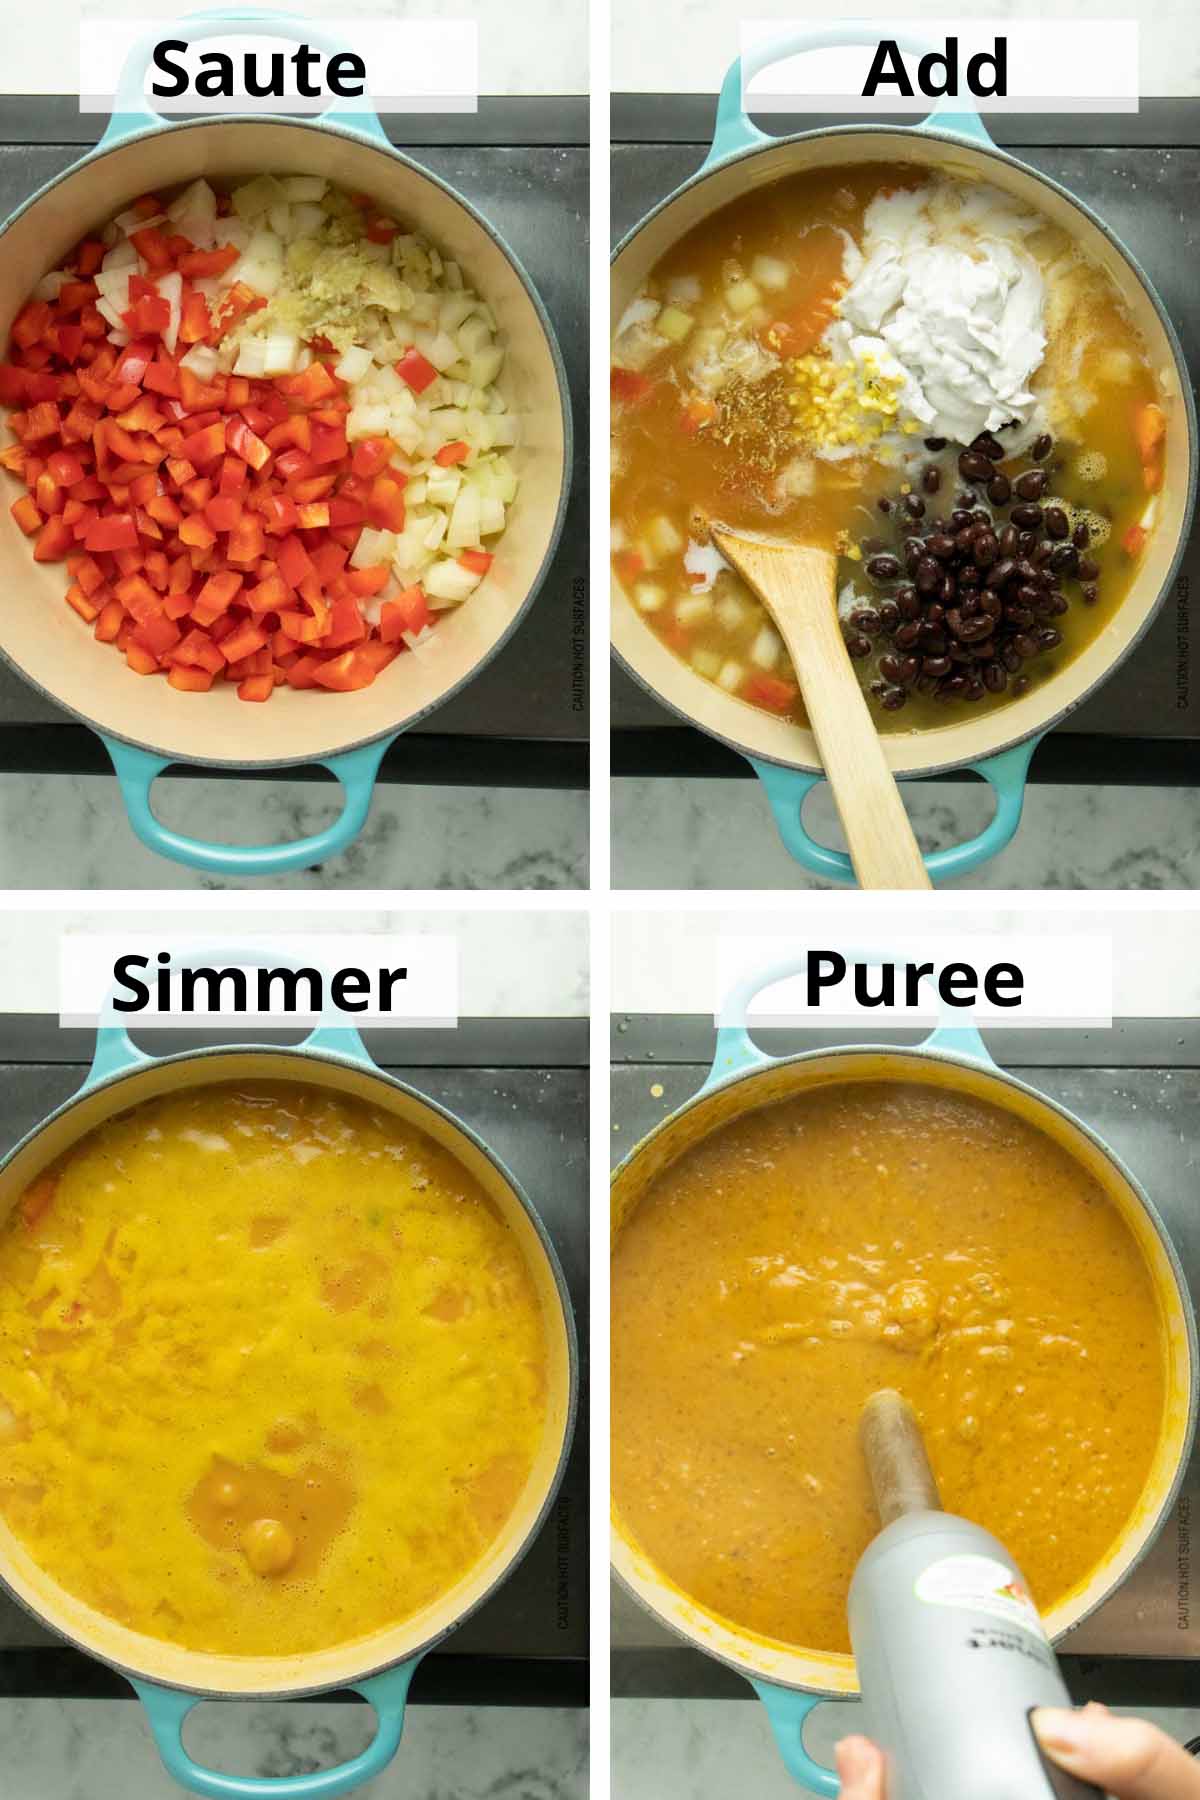 image collage showing the veggie sauté, additional ingredients in the  pot, simmering the soup, and pureeing it